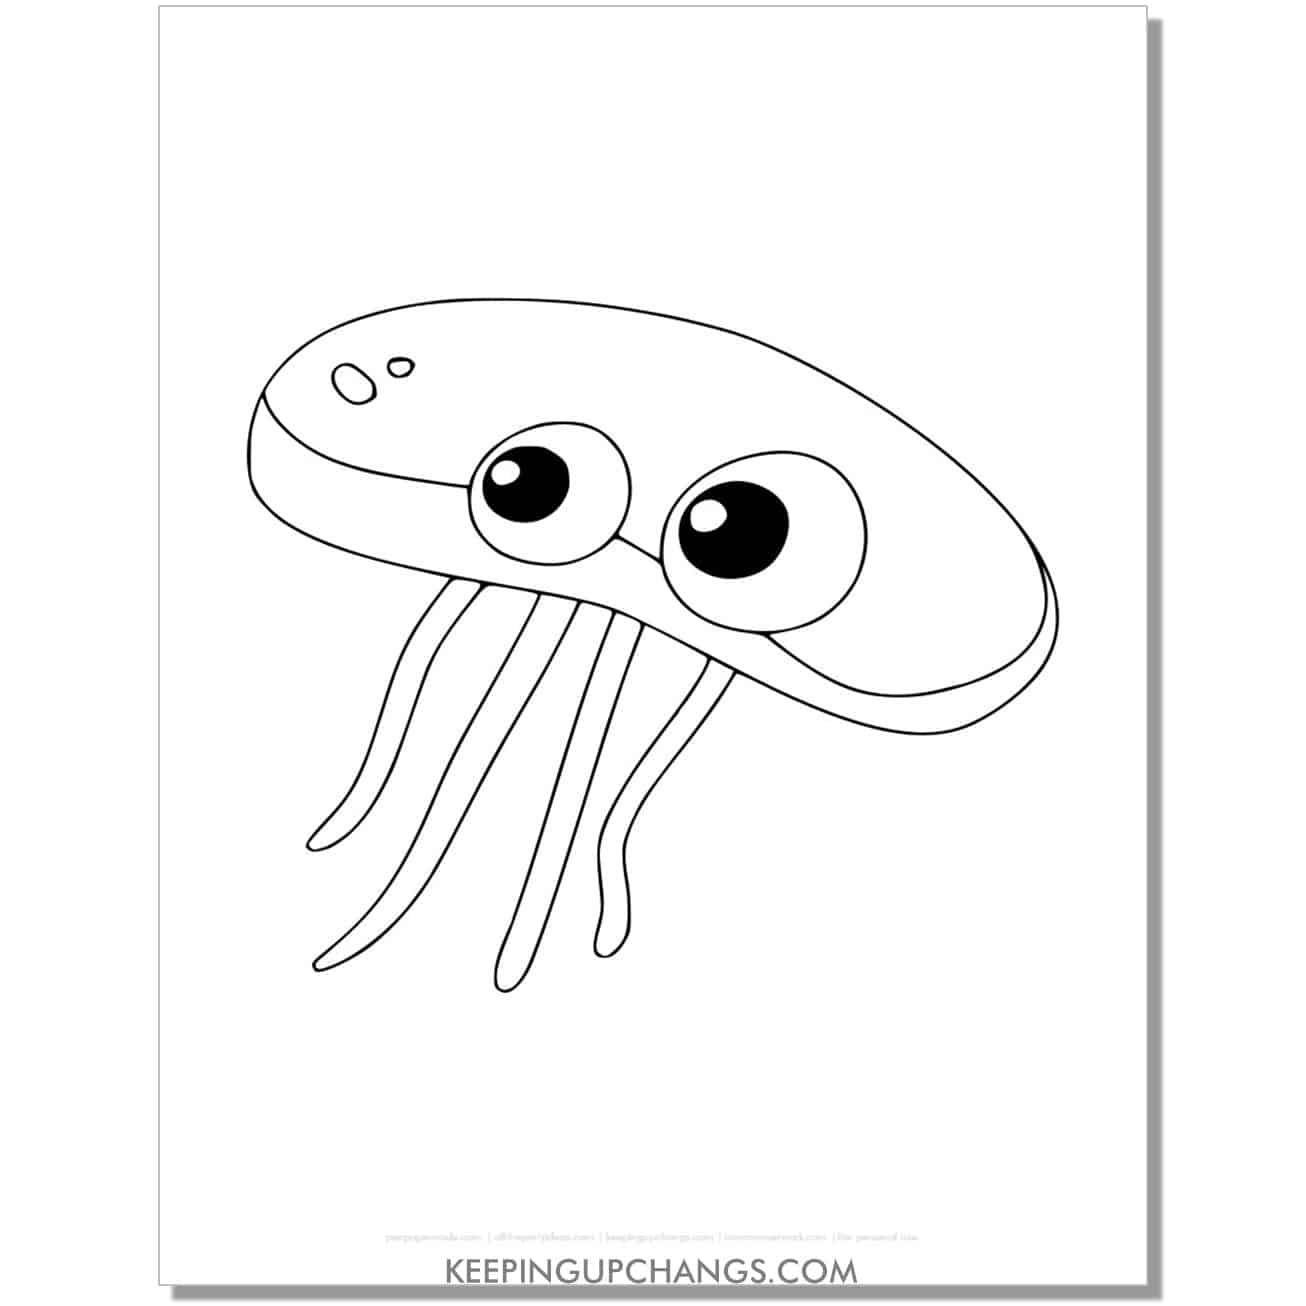 free easy, simple jellyfish drawing coloring page, sheet.